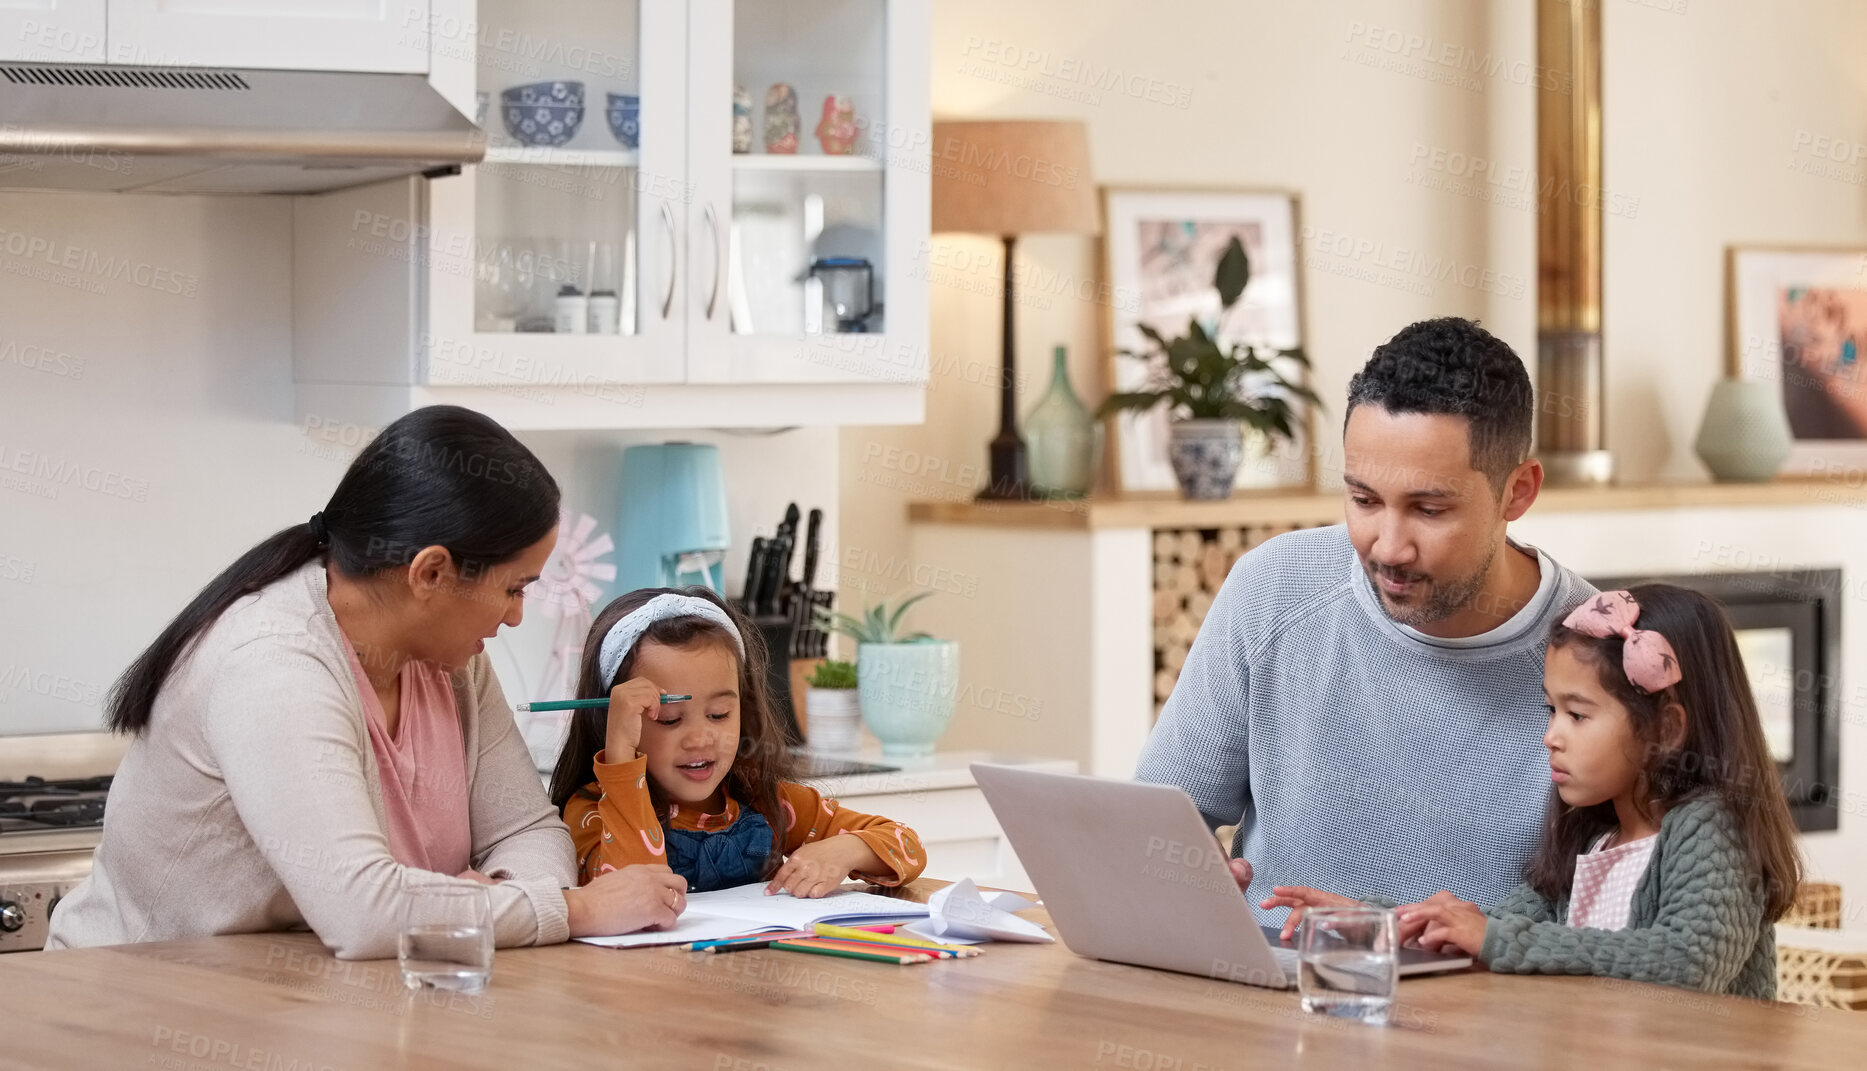 Buy stock photo Shot of two parents helping their children with their homework